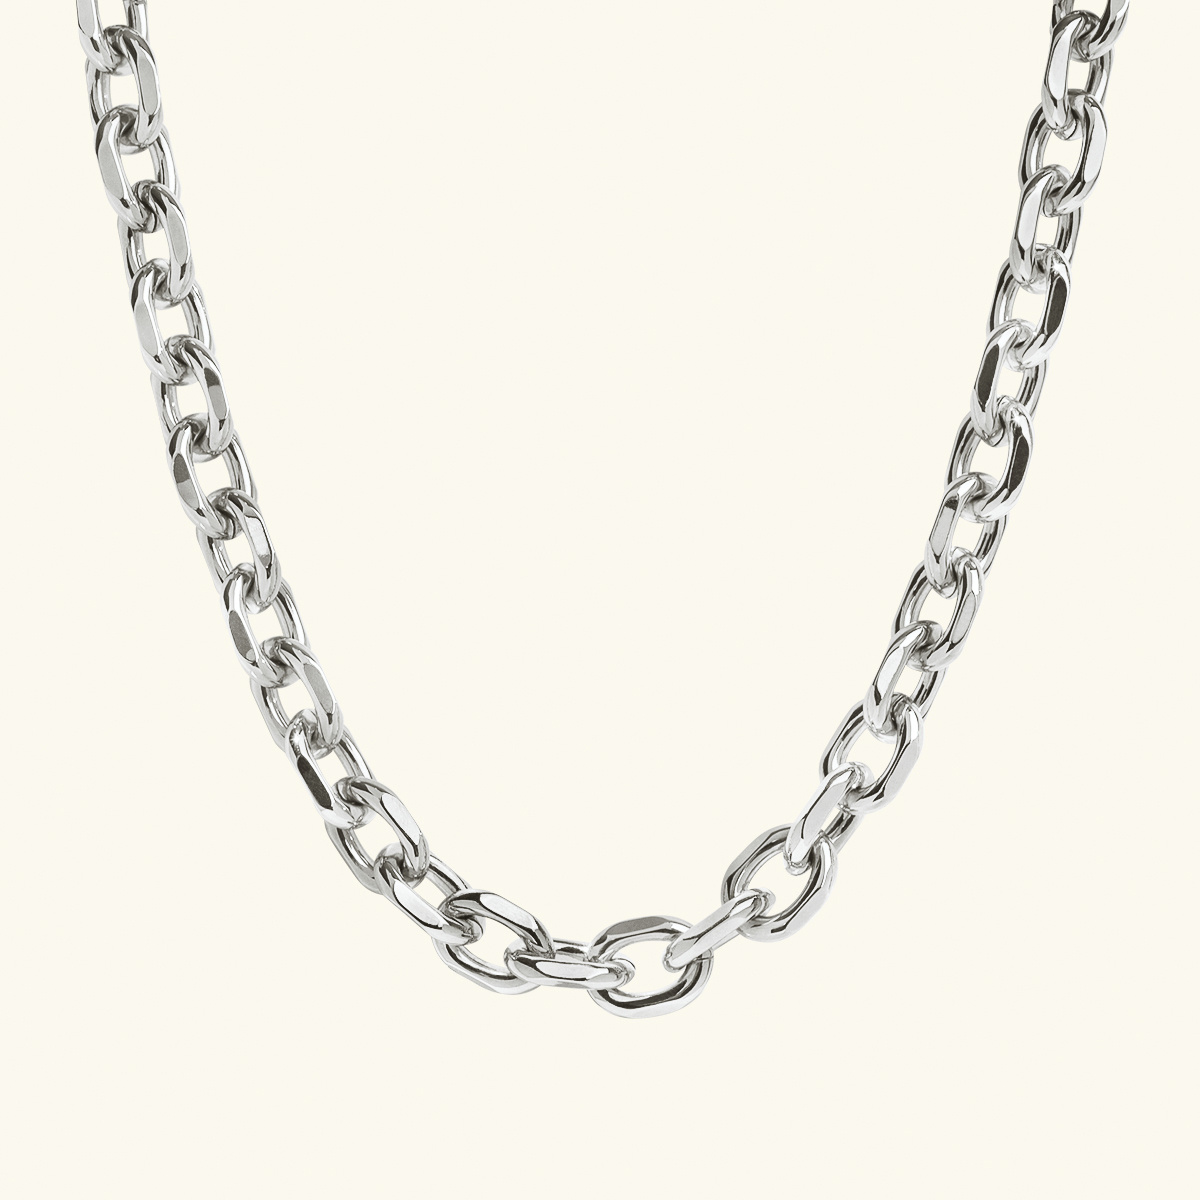 Amazon.com: 1/4 Inch x 13ft 304 Stainless Steel Coil Chain, 6mm x 4mThick  Proof Coil Chain, Heavy Duty Metal Chain, 1322 lbs(600kg) WLL : Industrial  & Scientific